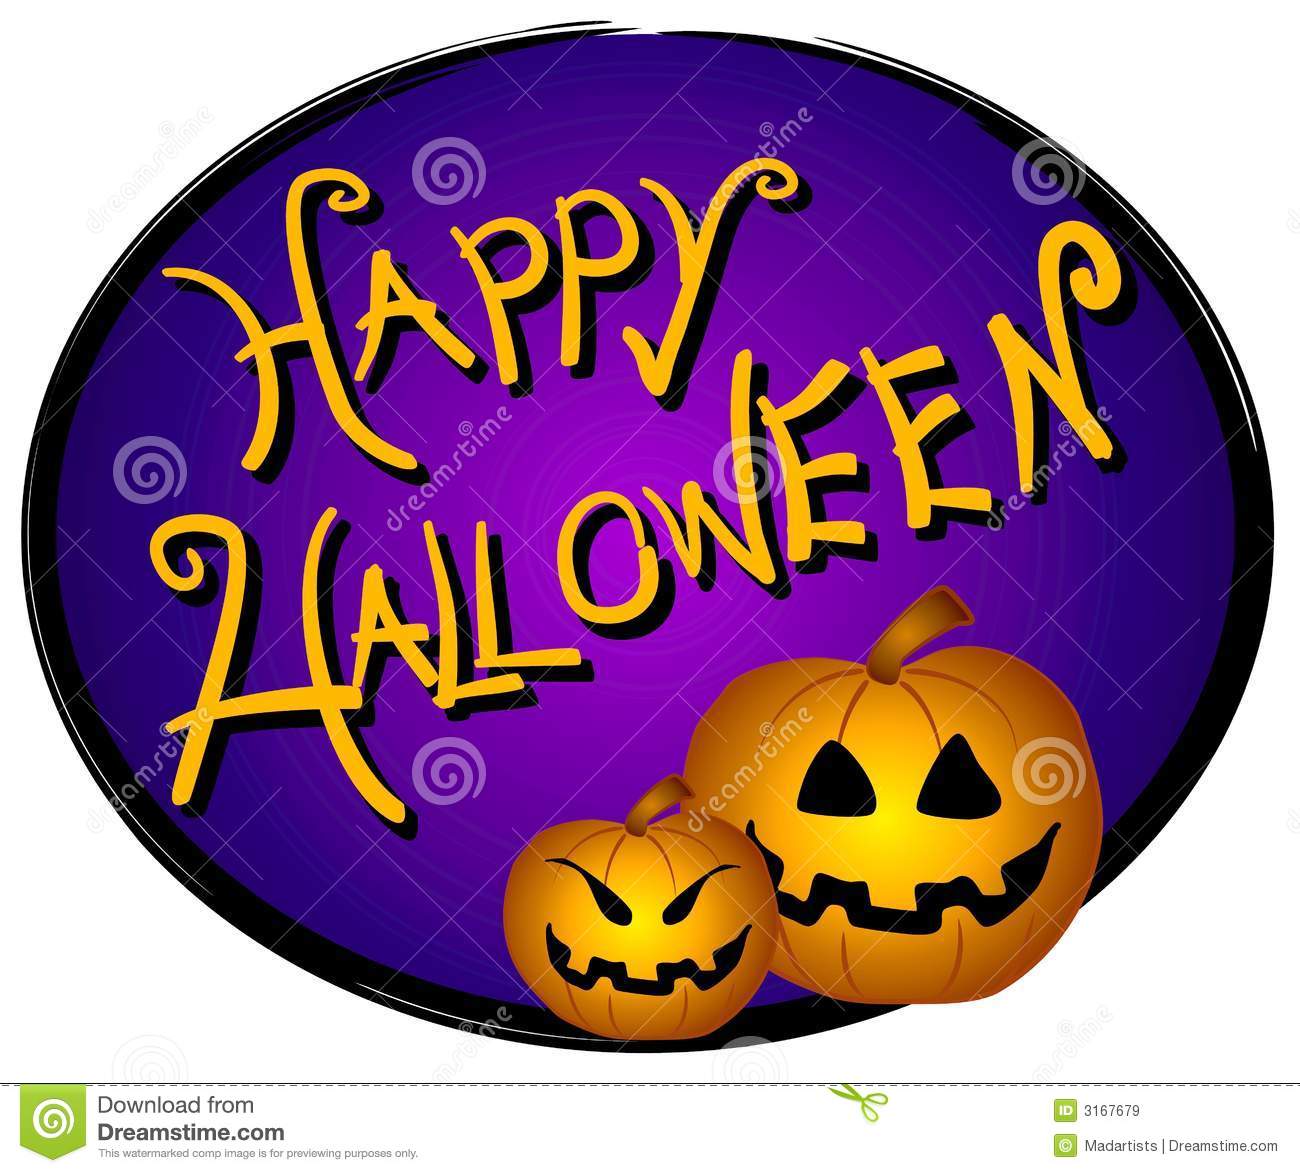 free clipart of halloween - photo #43